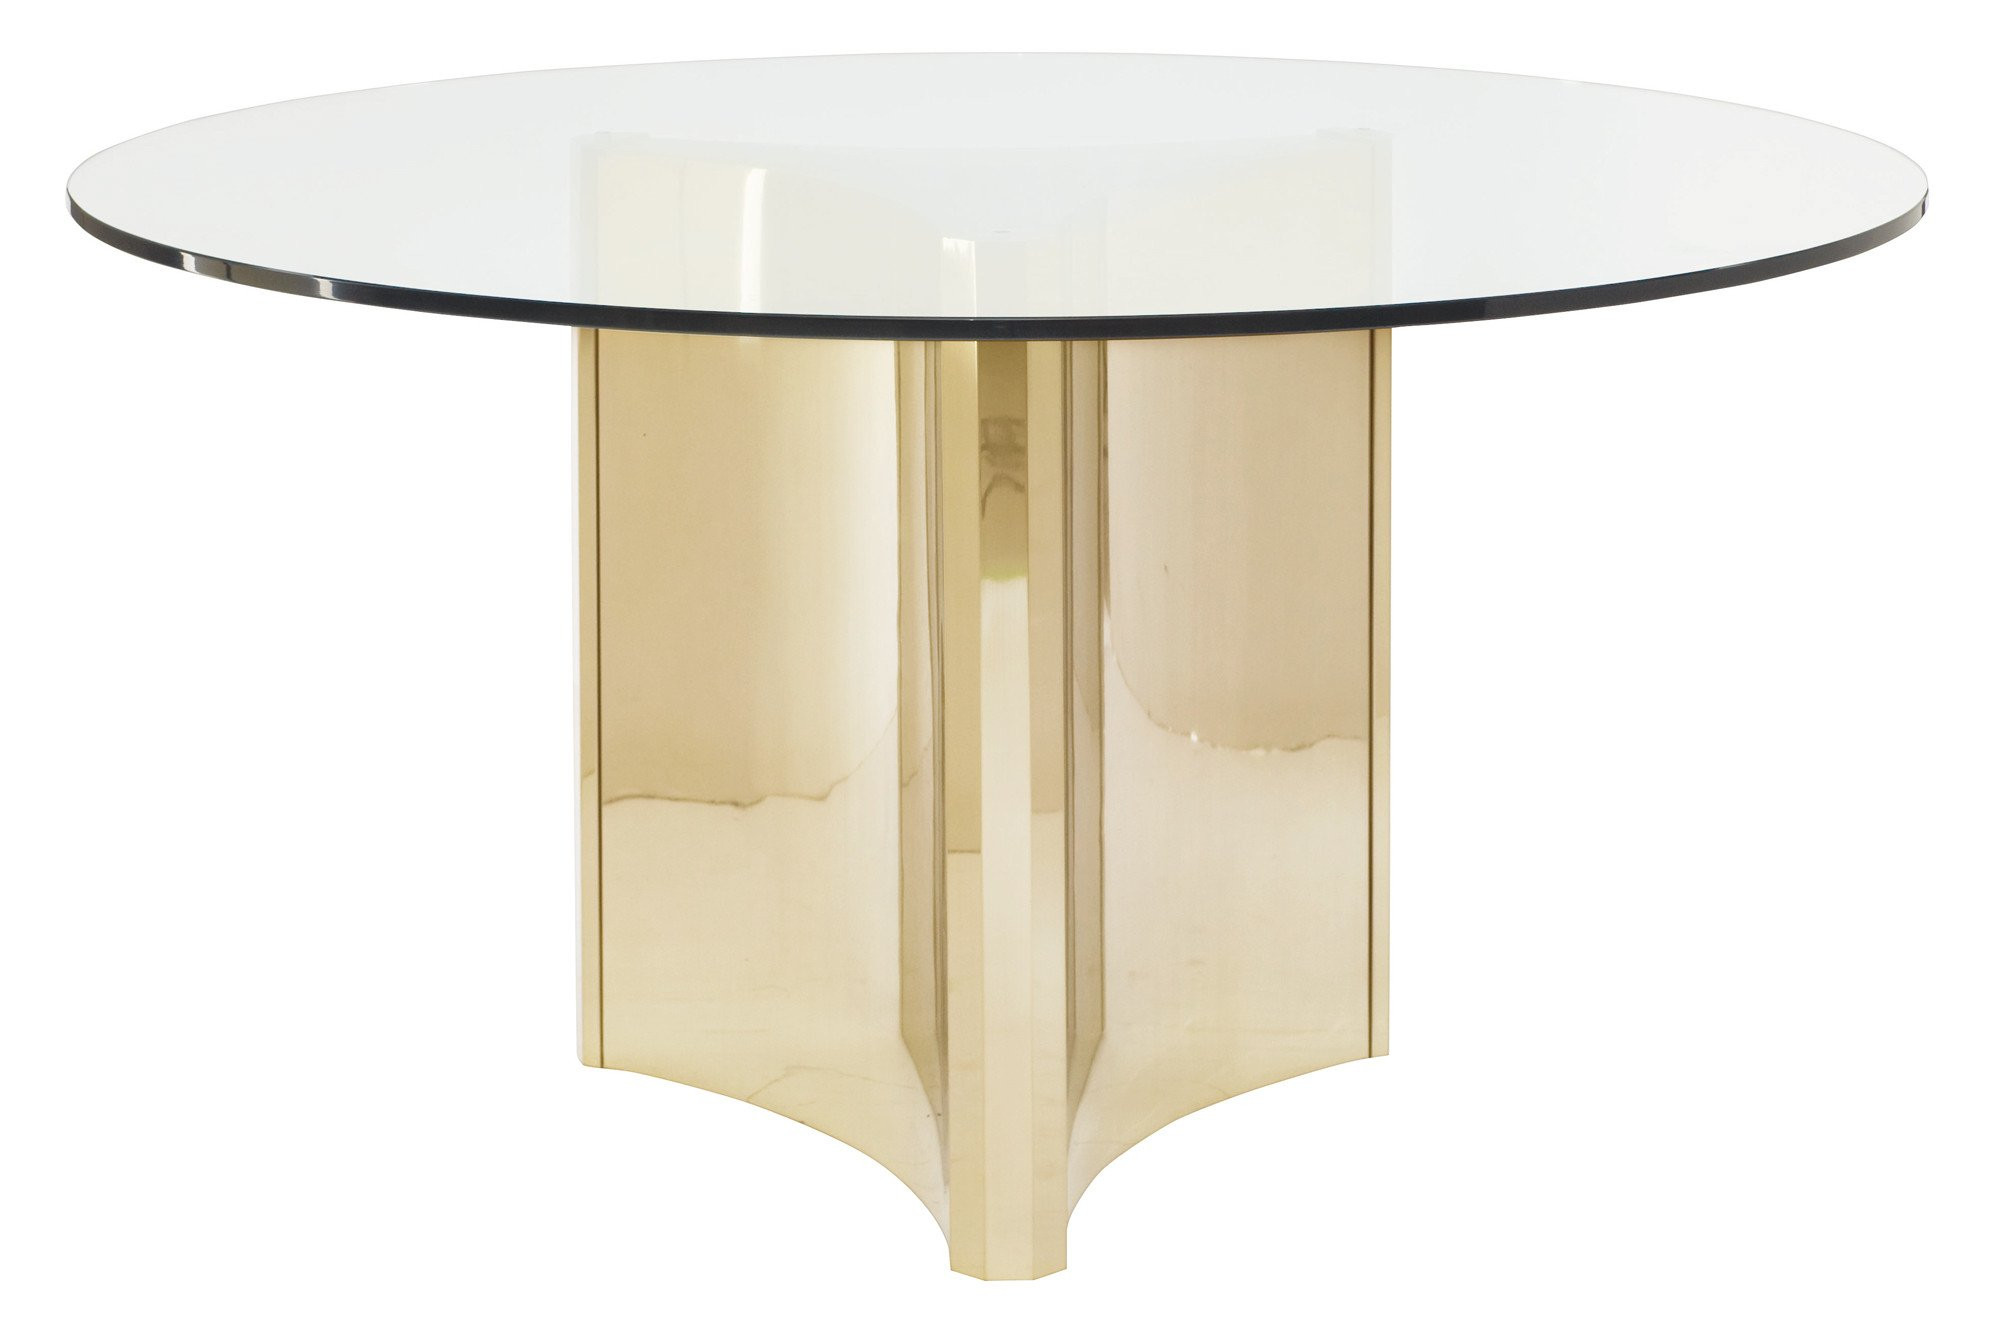 24 Popular Vase Turned Dining Table Magnolia 2024 free download vase turned dining table magnolia of https cadieuxinteriors ca daily https cadieuxinteriors ca products throughout abottrounddining v1408472103